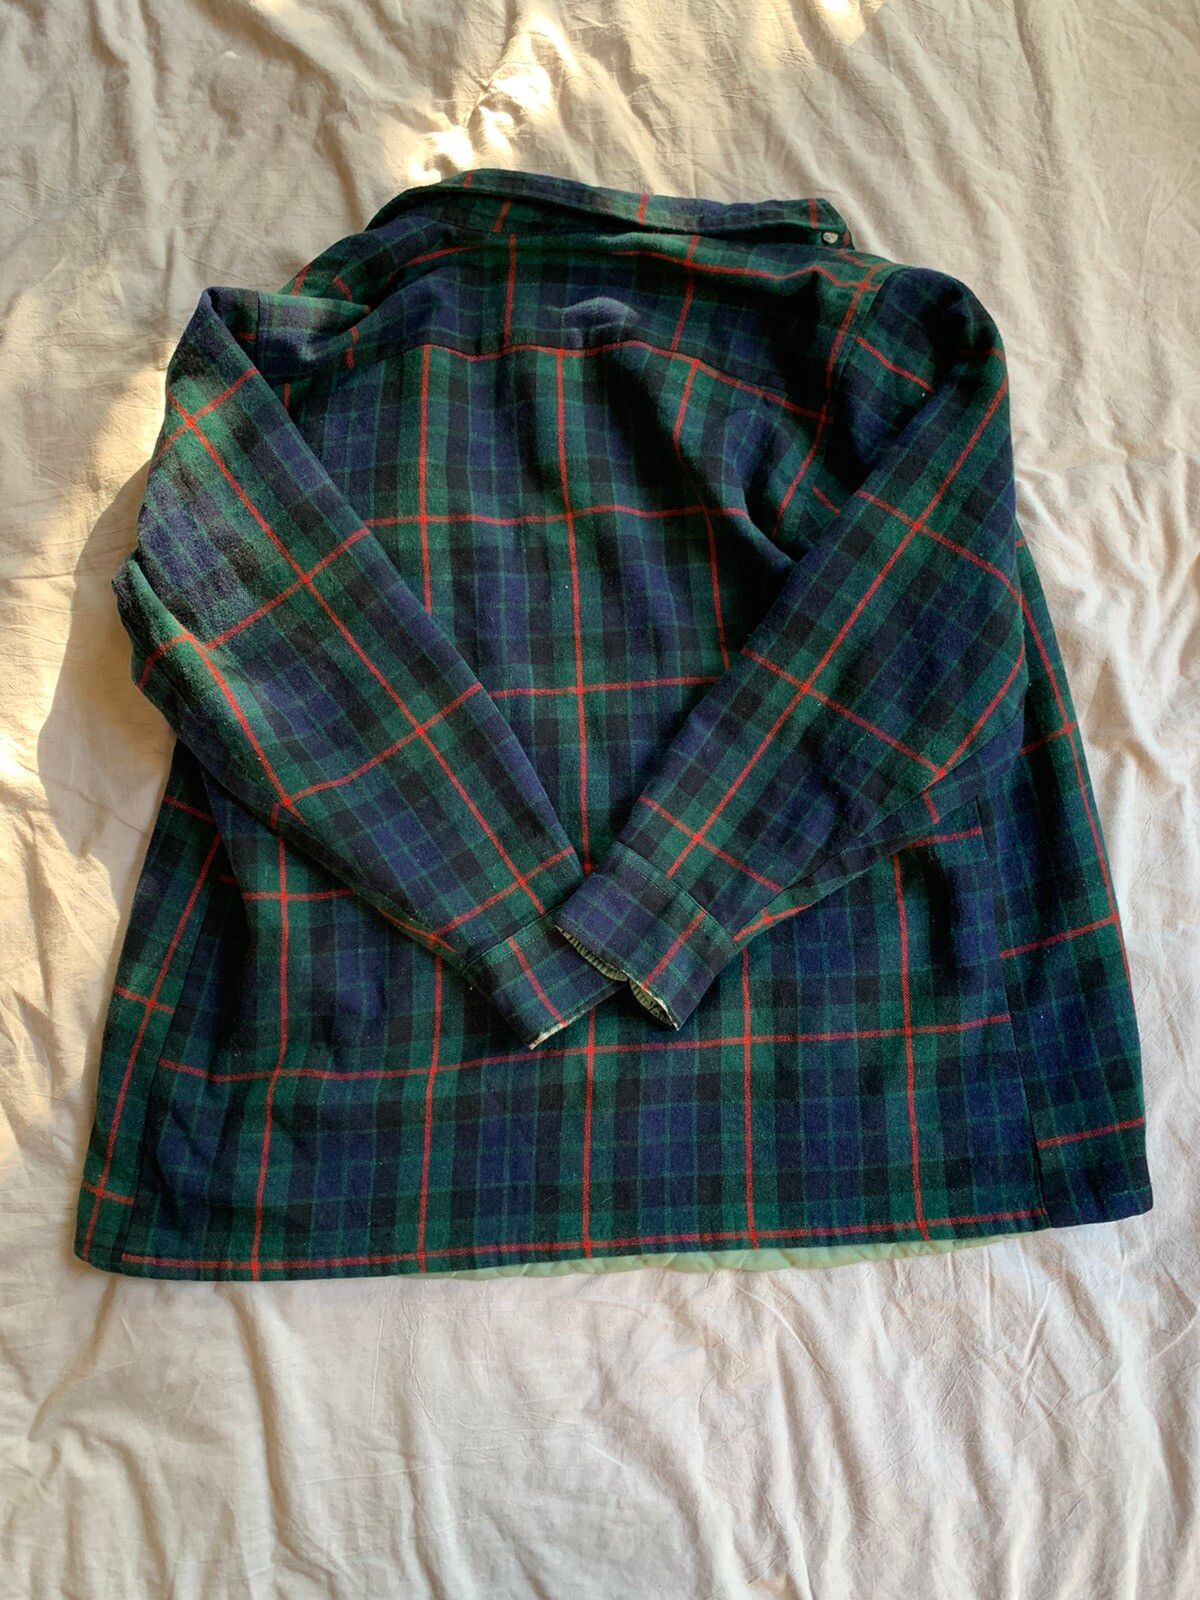 Vintage Green Plaid Shirt Jacket with Lining Size US L / EU 52-54 / 3 - 2 Preview